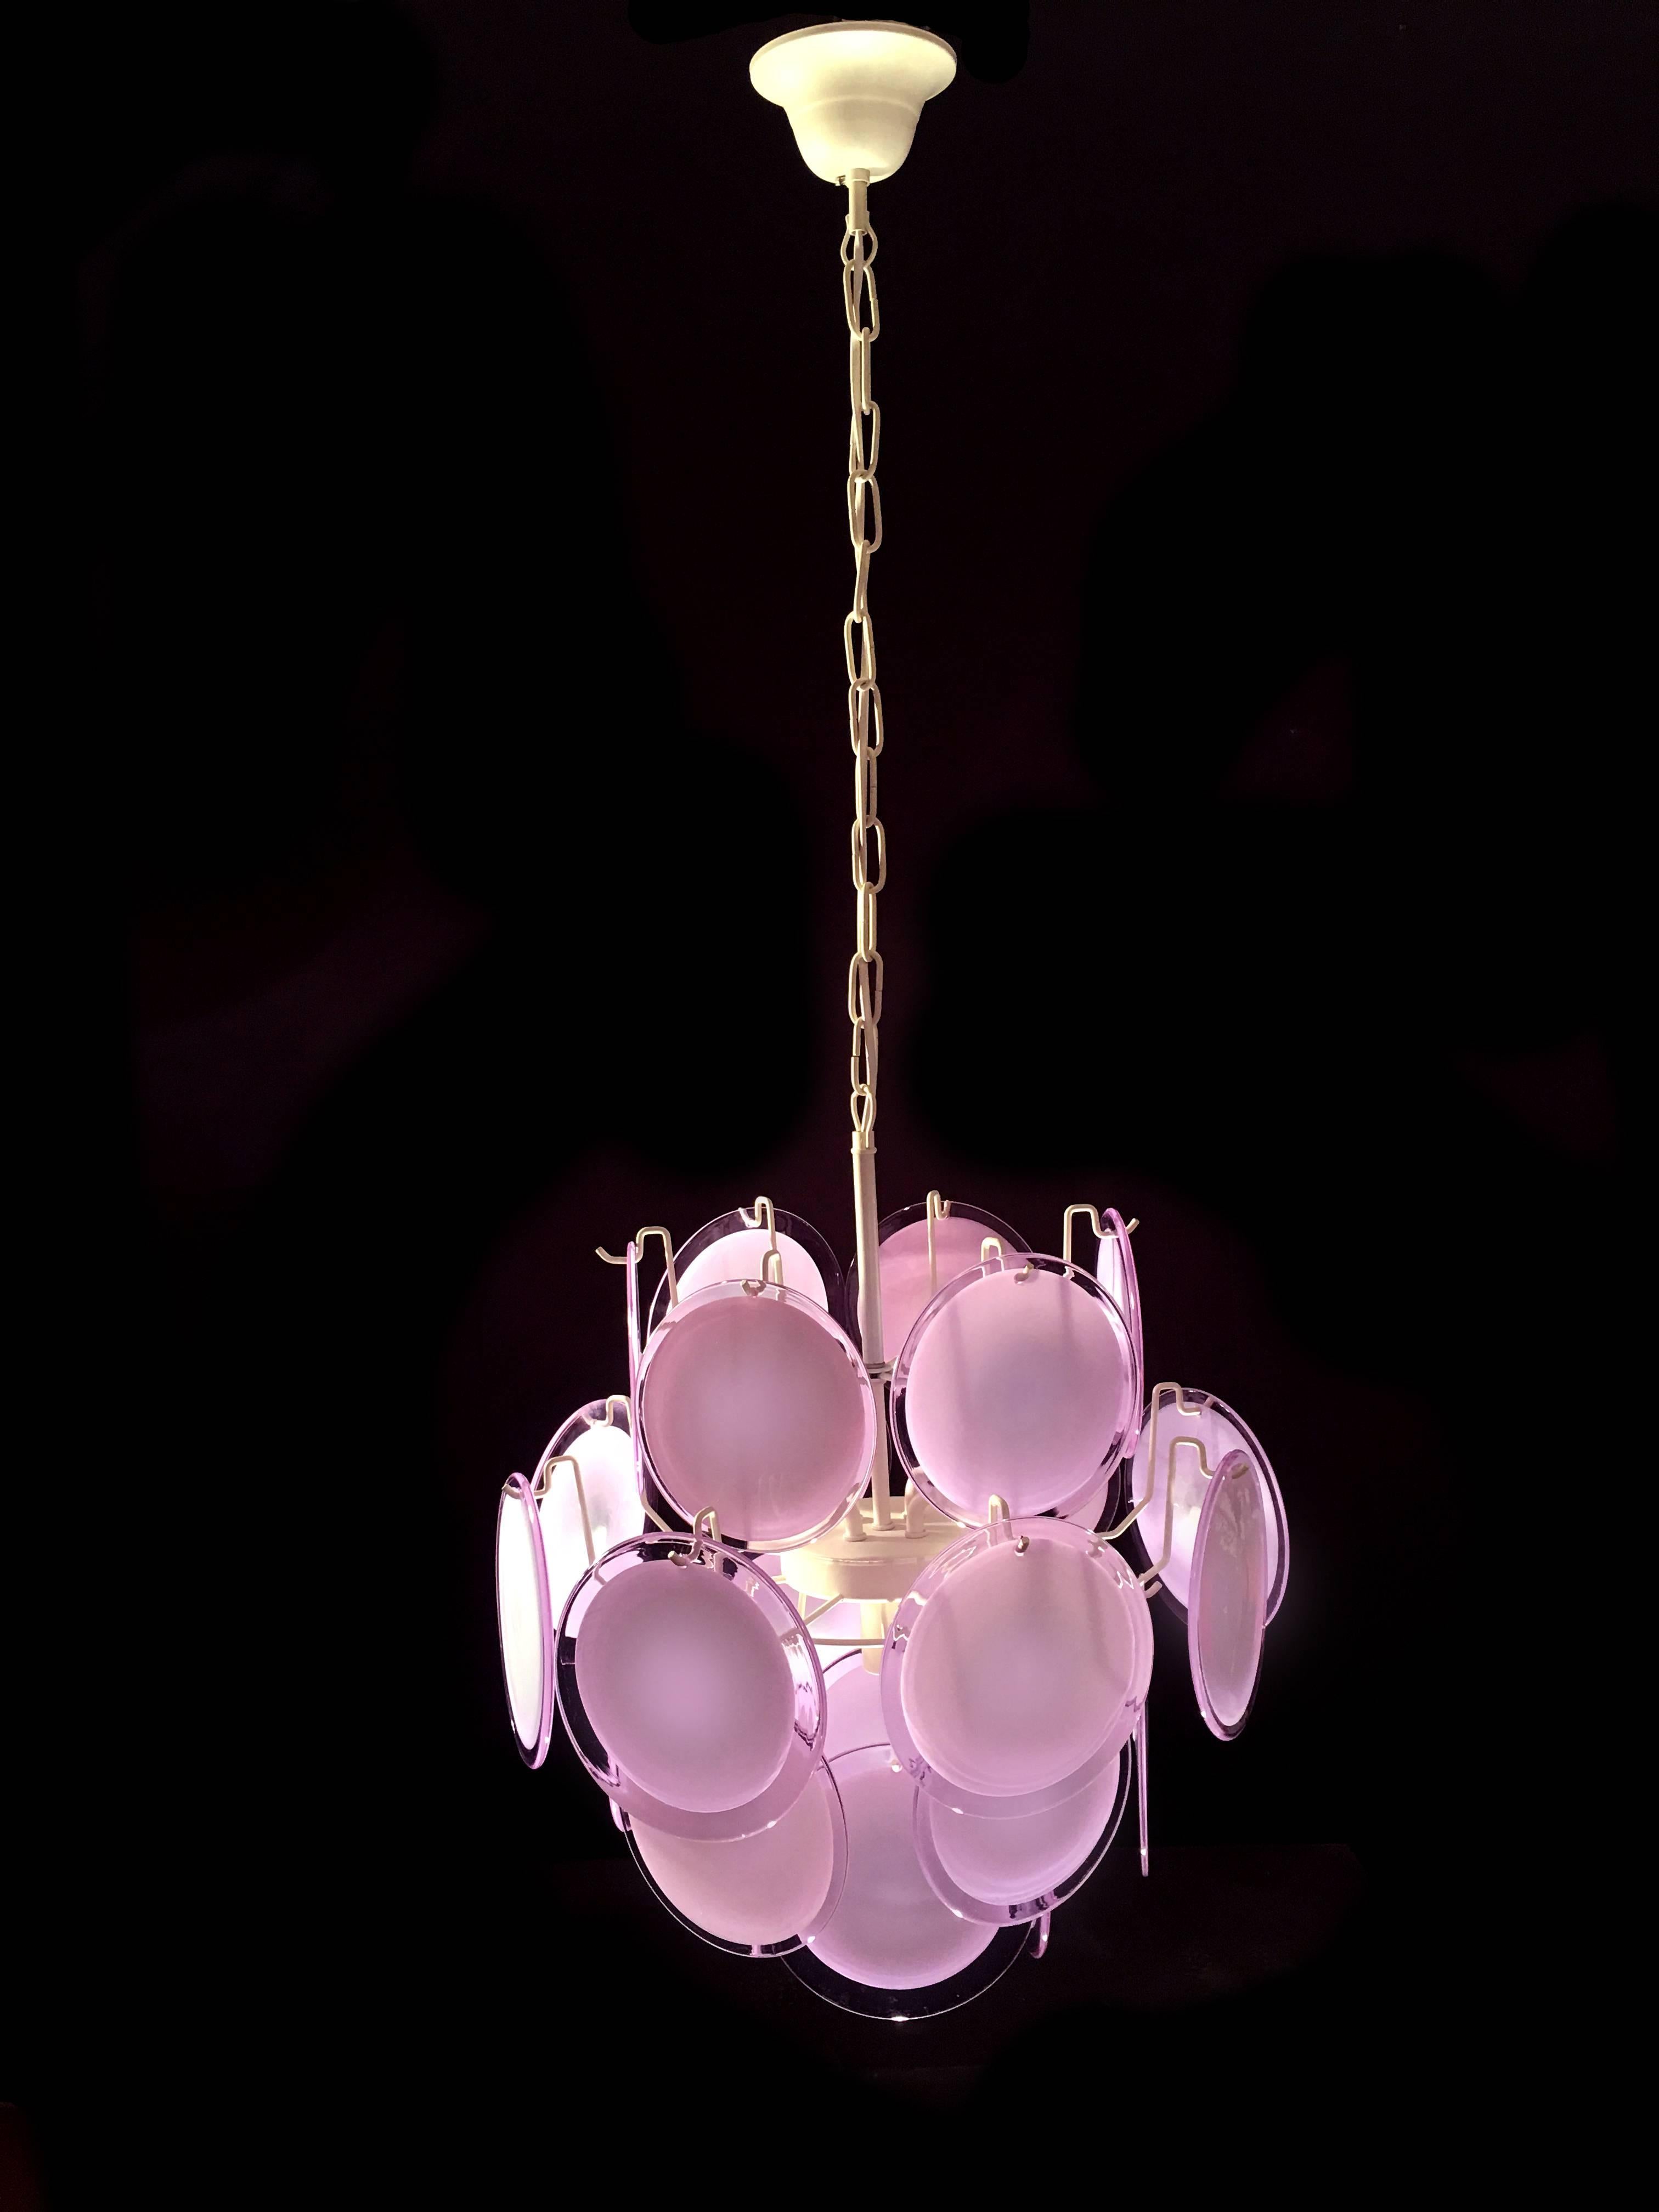 20th Century Pair of Italian Disc Chandeliers by Vistosi, Murano, 1970s For Sale